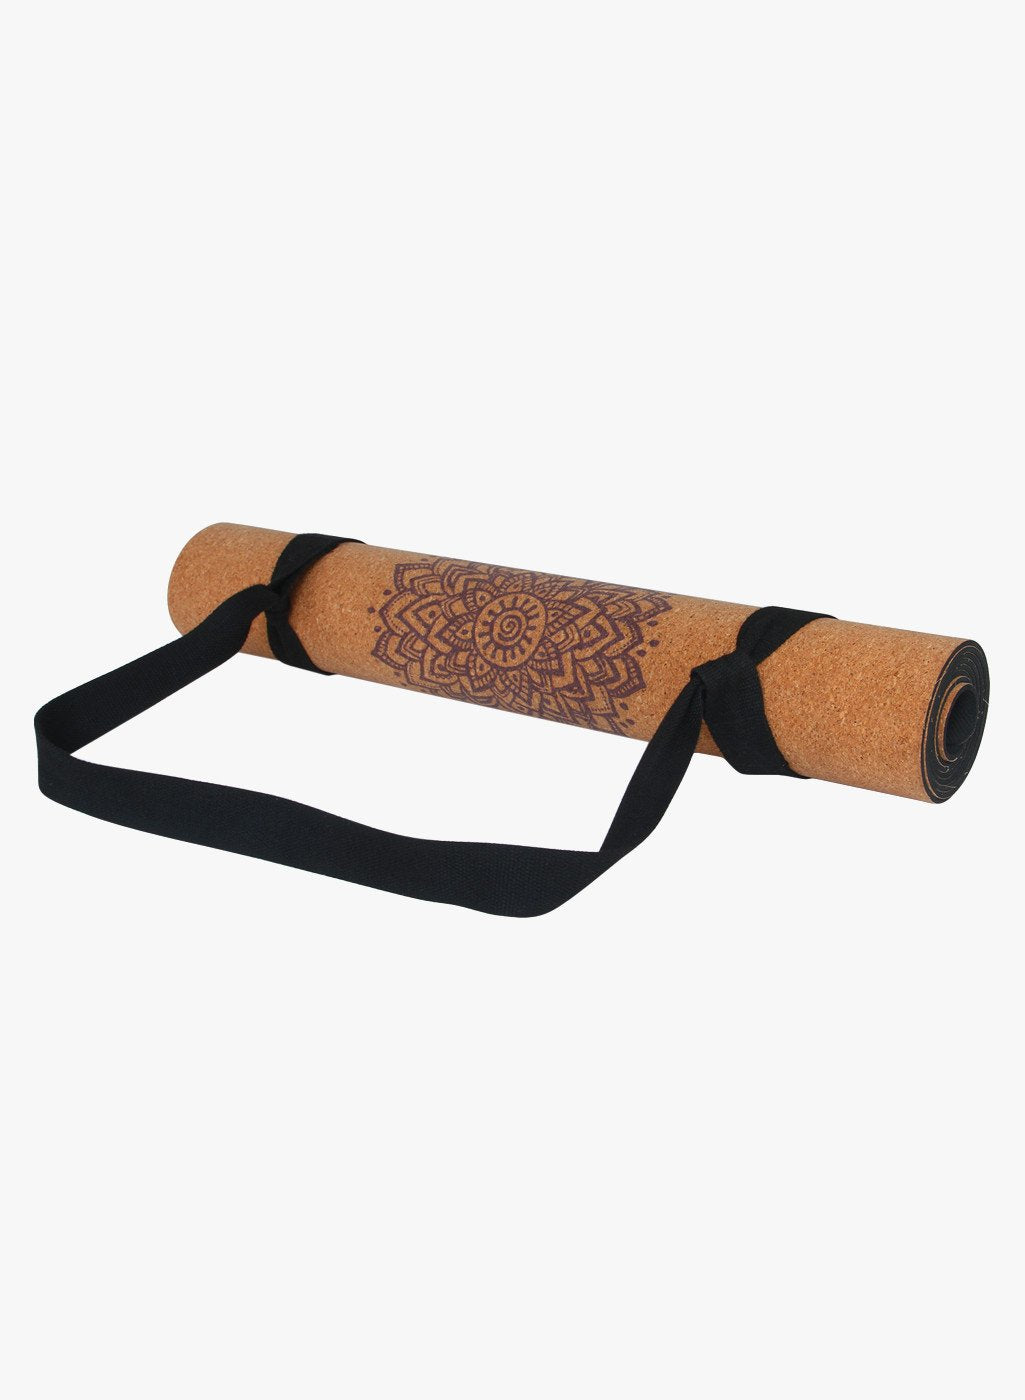 Shakti Warrior has eco-friendly, organic cork and natural rubber yoga mats. They are non-slip, high quality, with good cushioning for the joints and portable